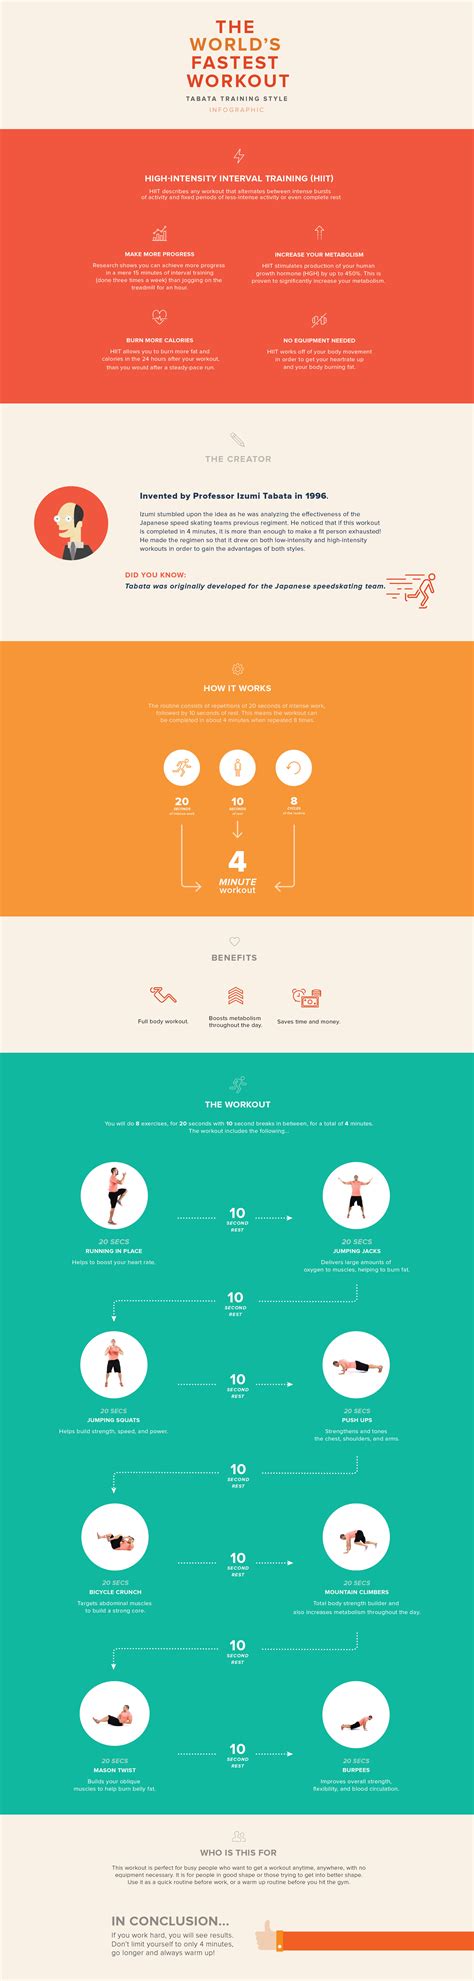 Keep Fit Daily With This Tabata 4 Minute Workout App